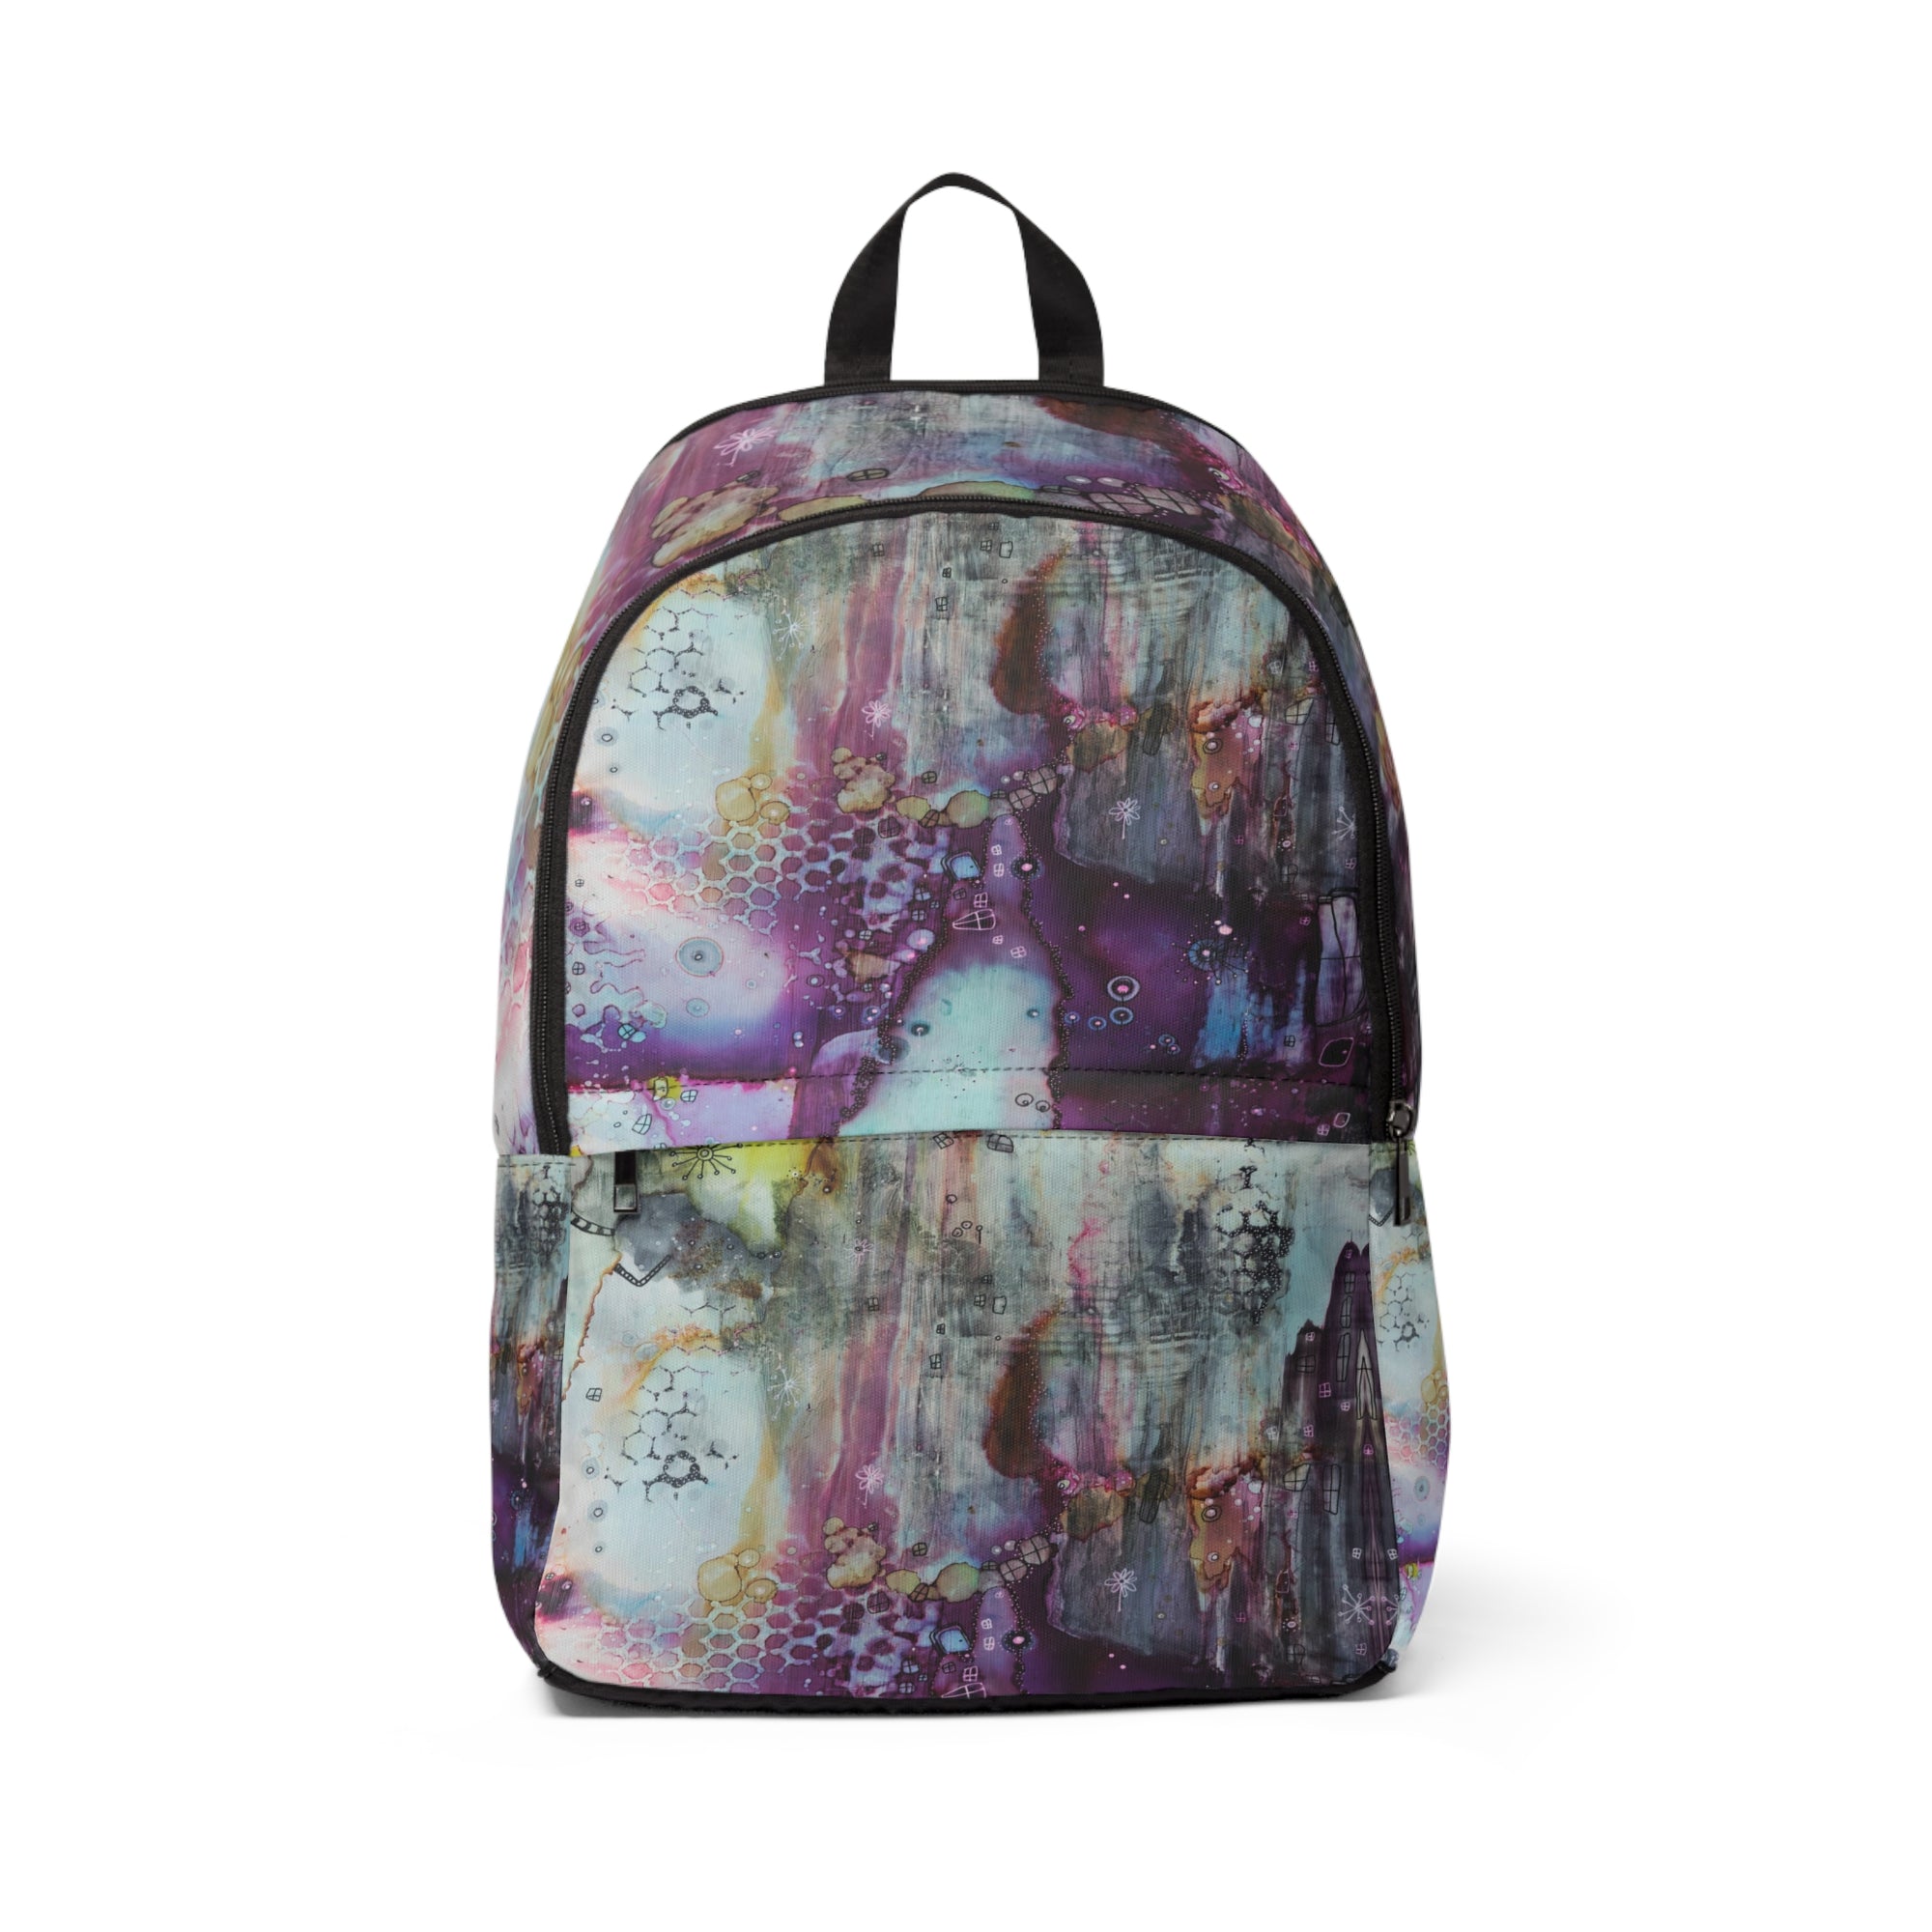 Colorful Abstract Art Backpack "Purple Abyss"